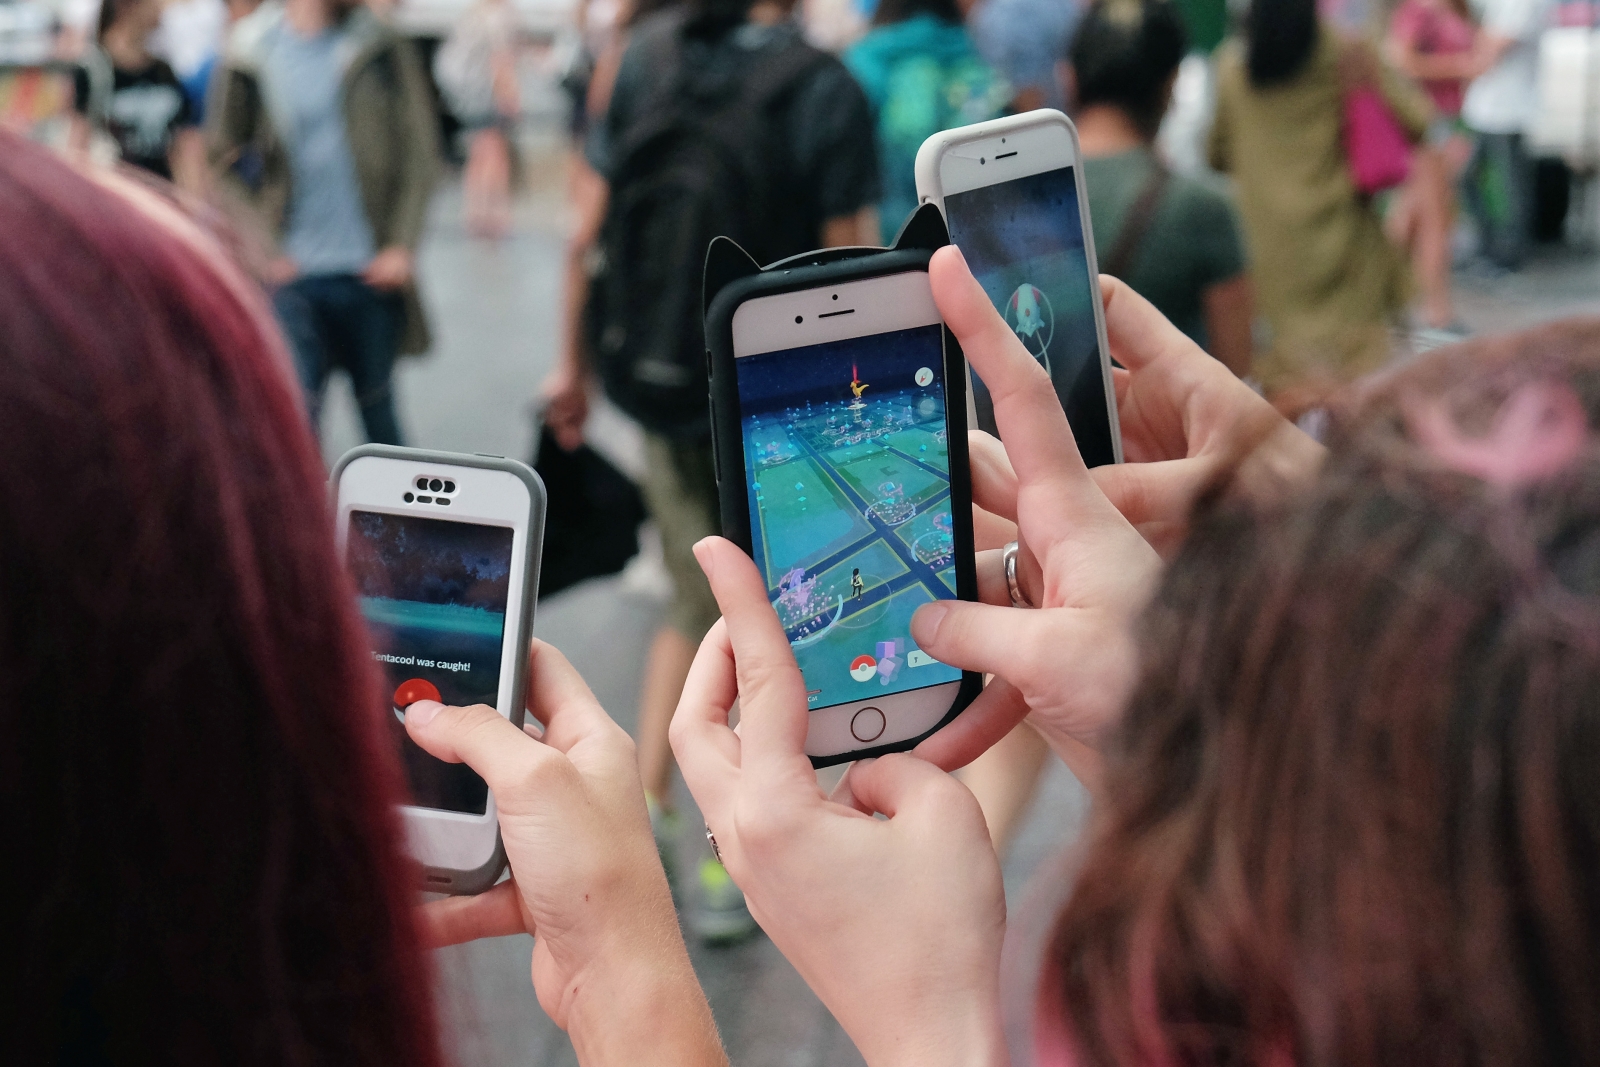 Pokemon Go developer explains why Pokevision and other third-party tracking apps were blocked